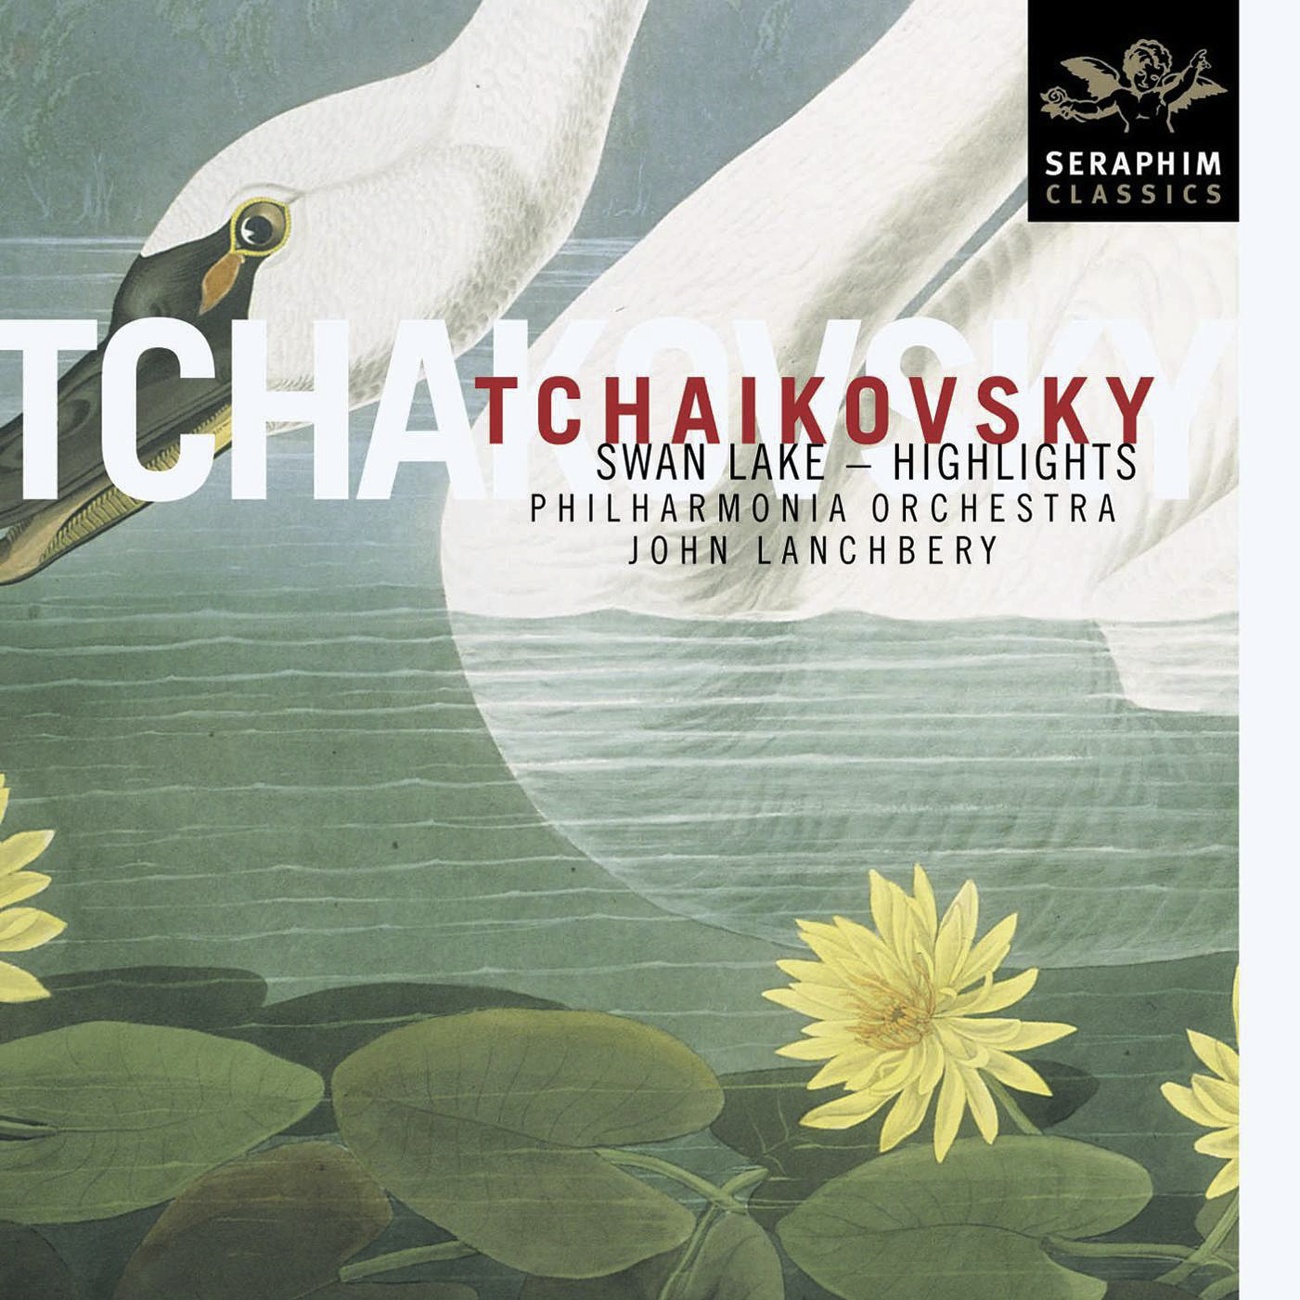 Swan Lake Op. 20, Act I: 8. Dance with Goblets (Tempo di polacca)